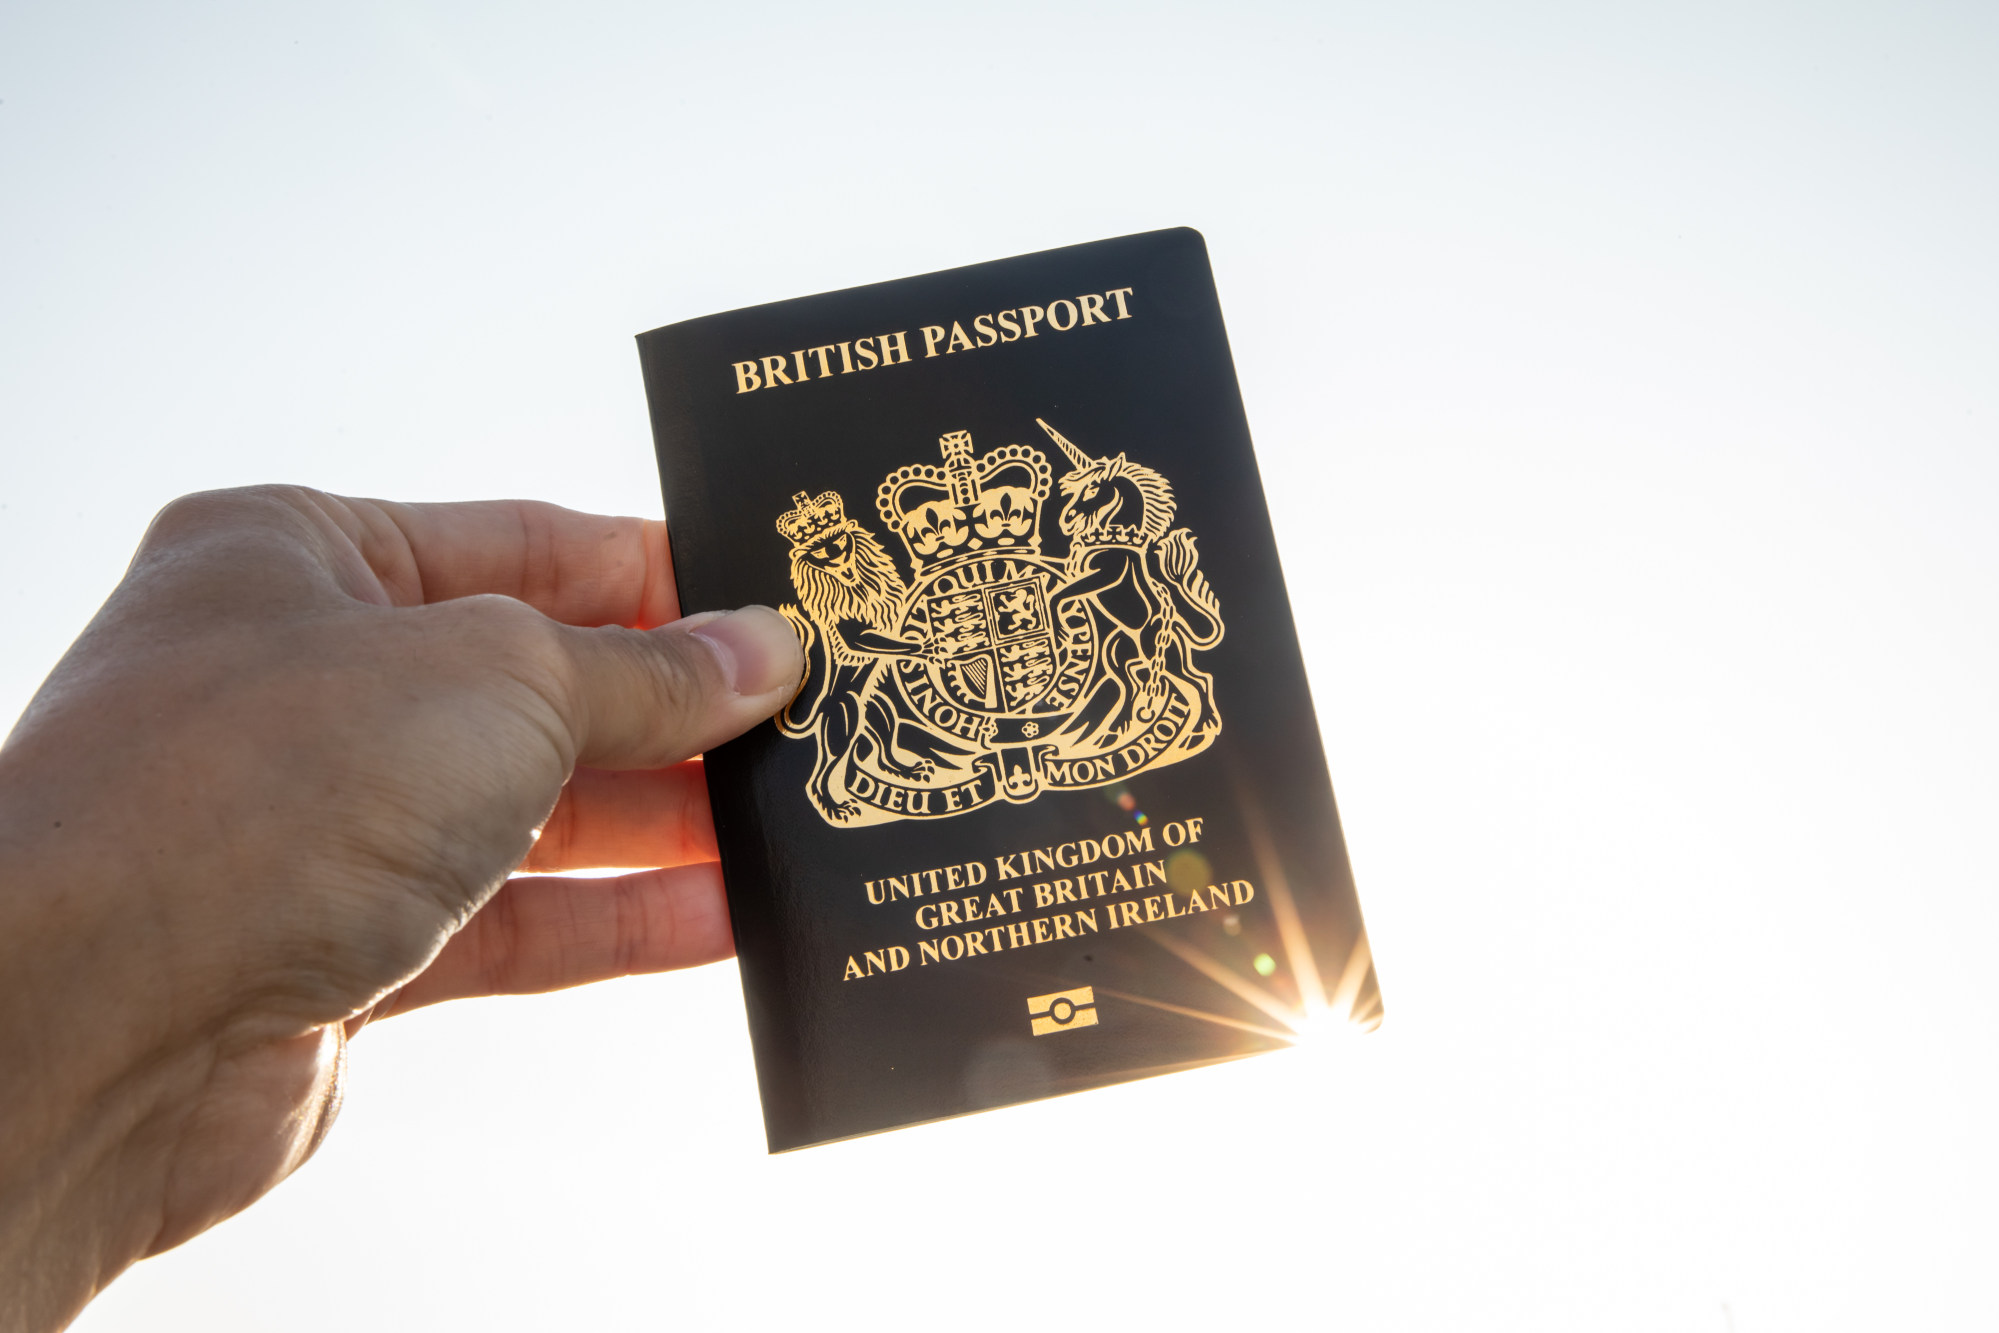 The British National (Overseas) pathway to citizenship scheme for Hongkongers could continue under Truss’ leadership. Photo: Bloomberg